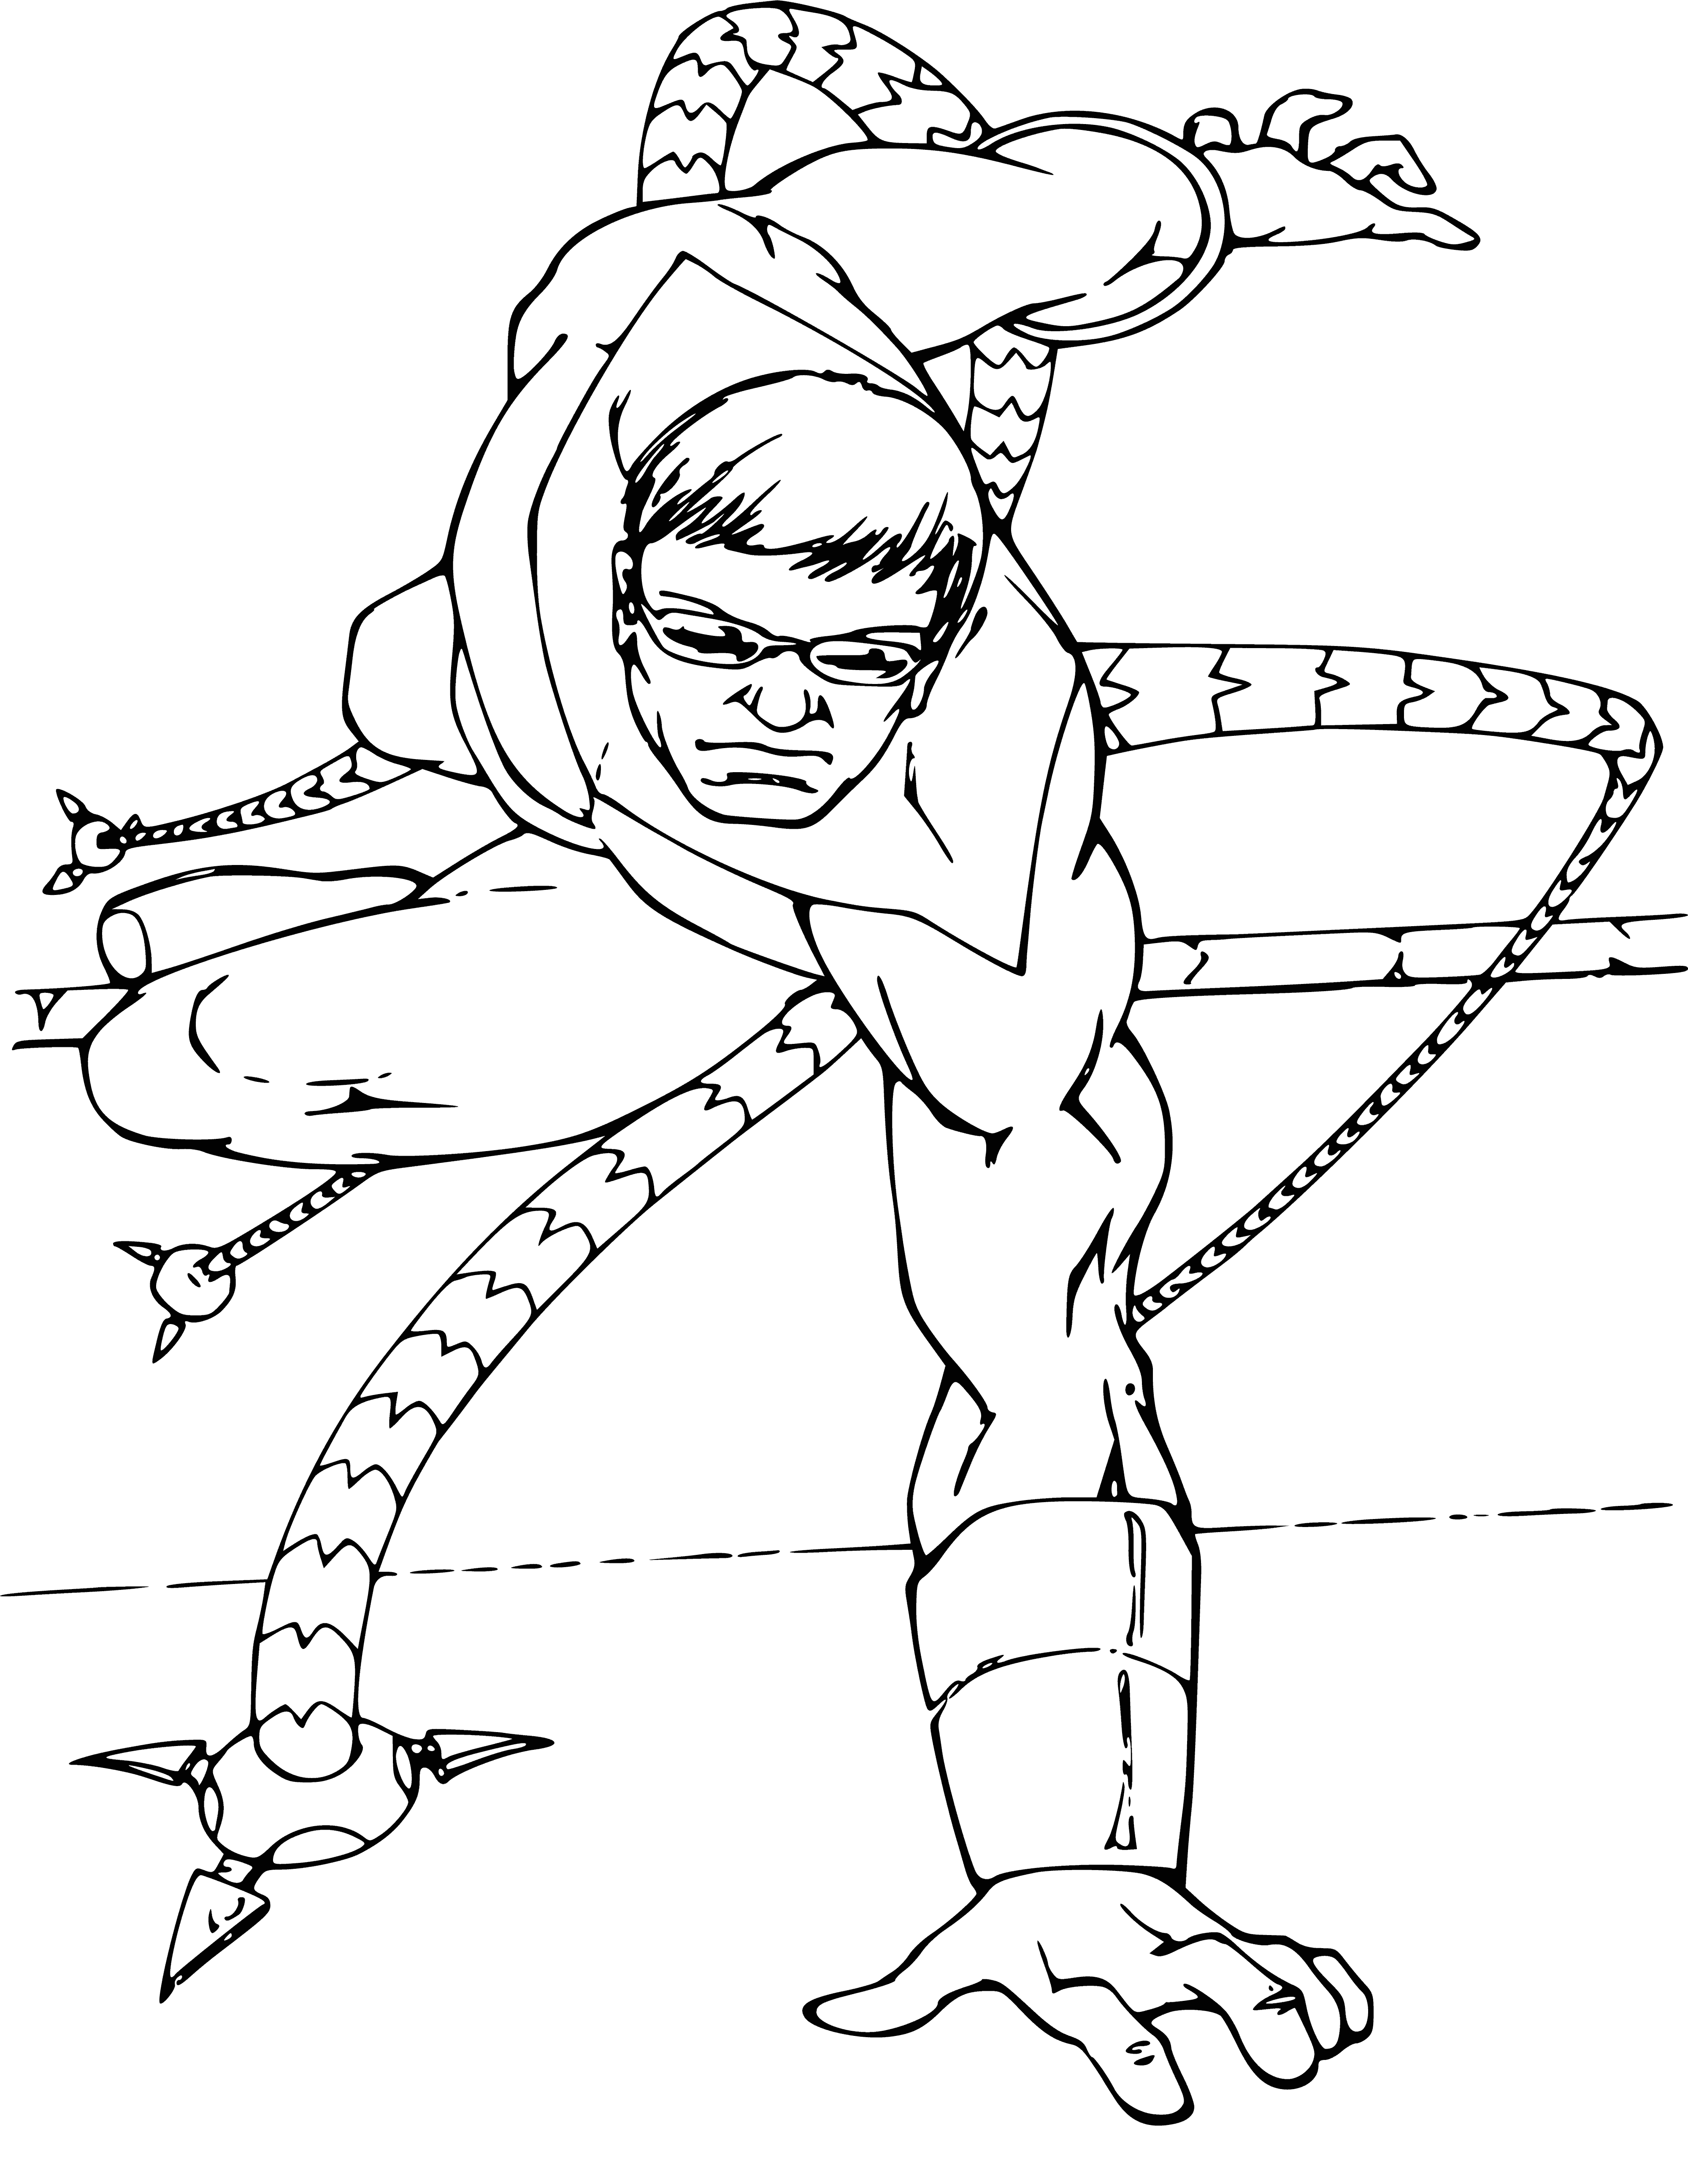 Dr. Octopus coloring page